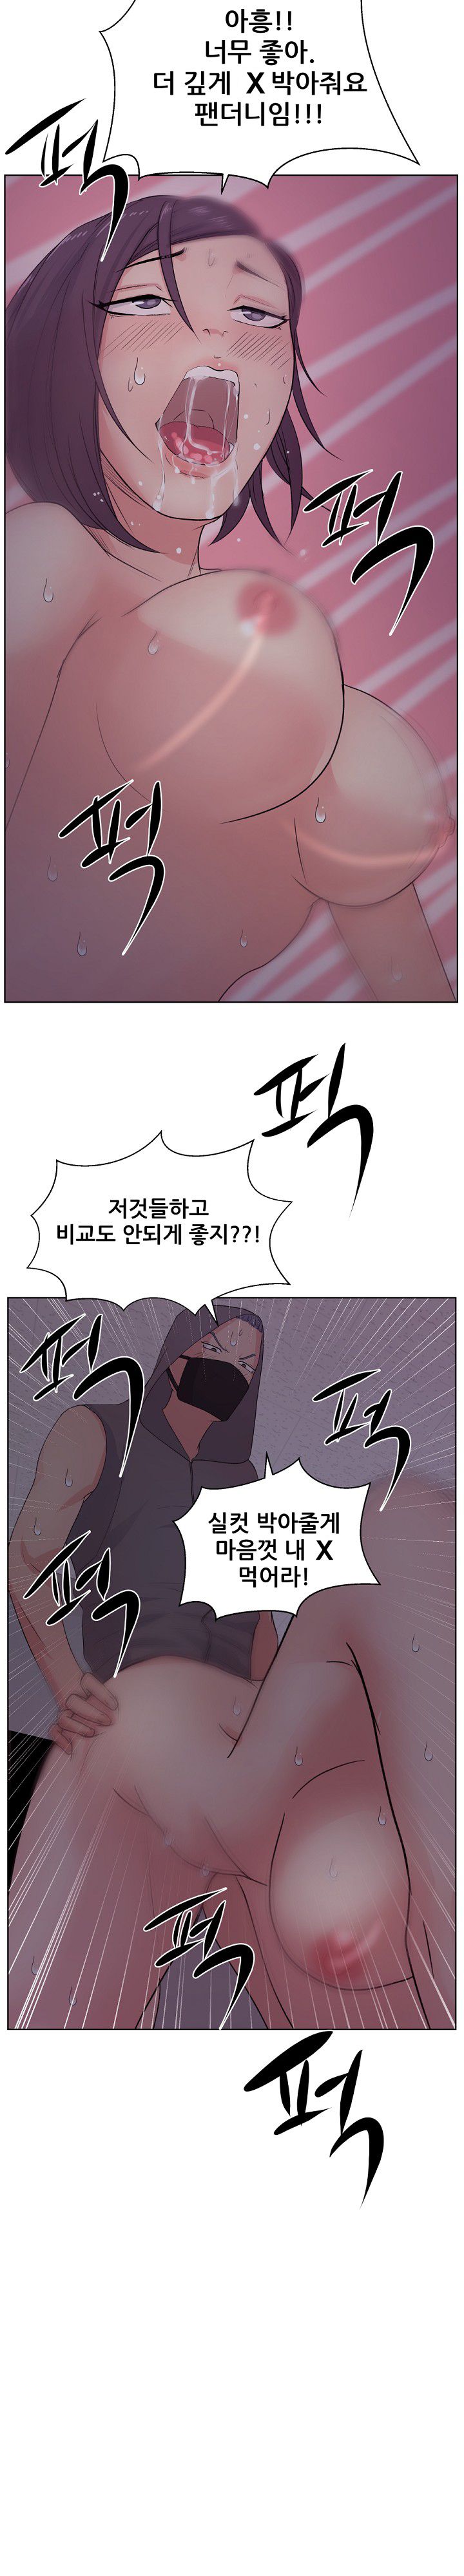 Sooyung Comic Shop Raw - Chapter 6 Page 16